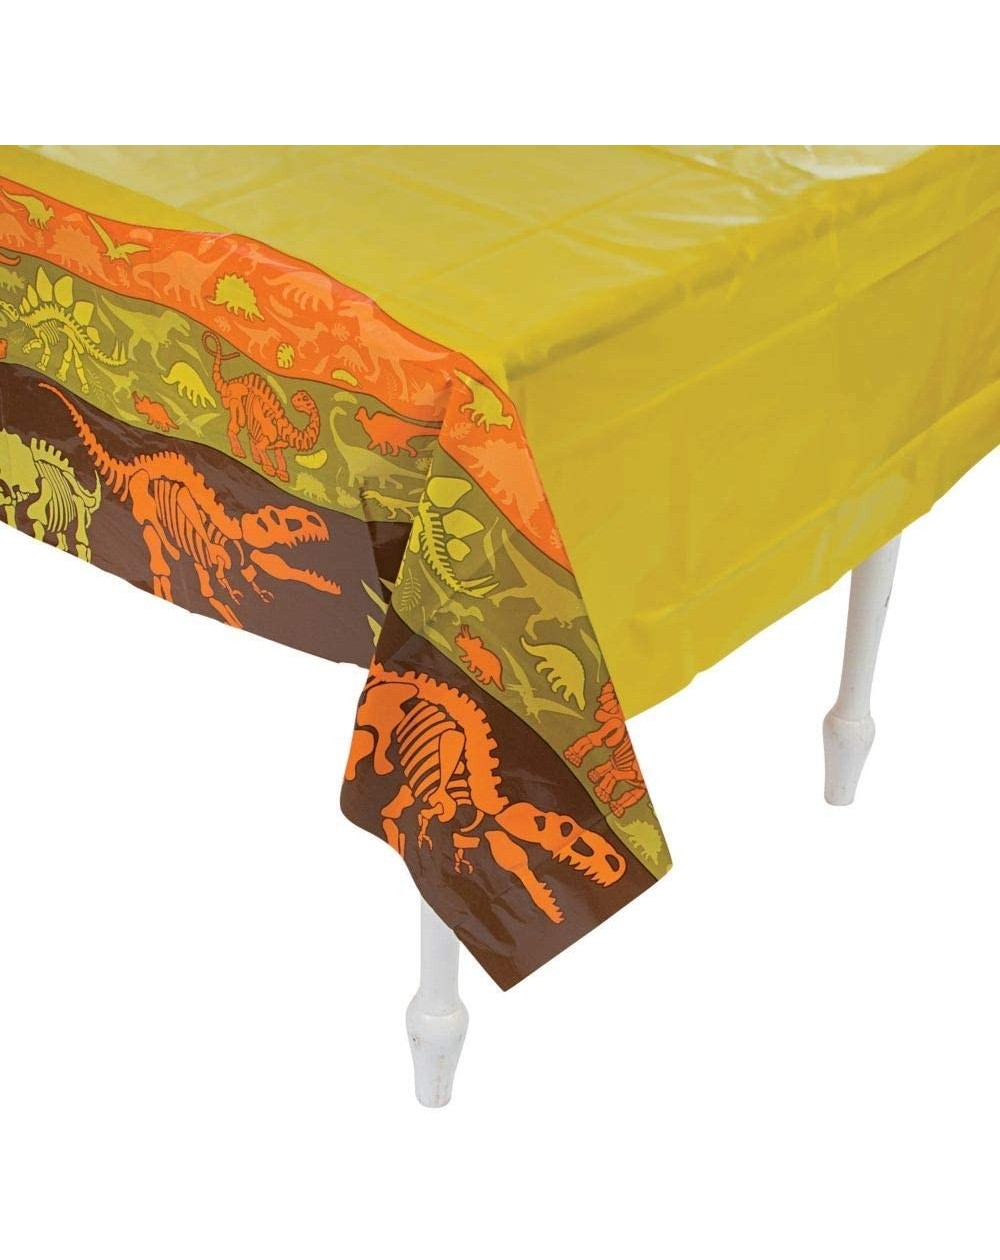 Tablecovers DINO DIG TABLECOVER - Party Supplies - 1 Piece - CU12FFJCXQ1 $10.73